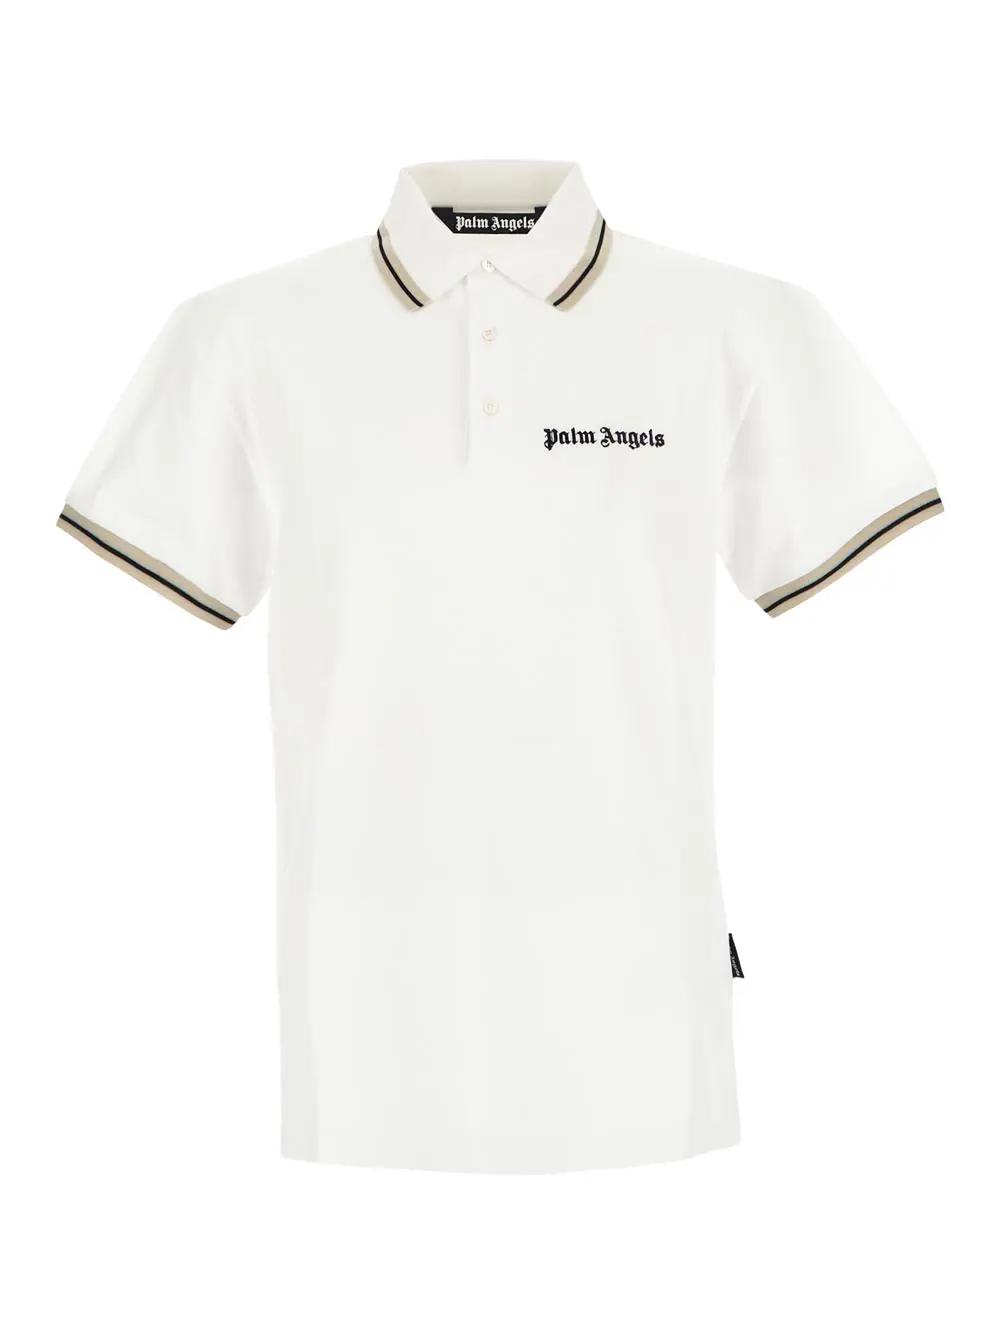 Palm Angels Embroidered Logo Shirt